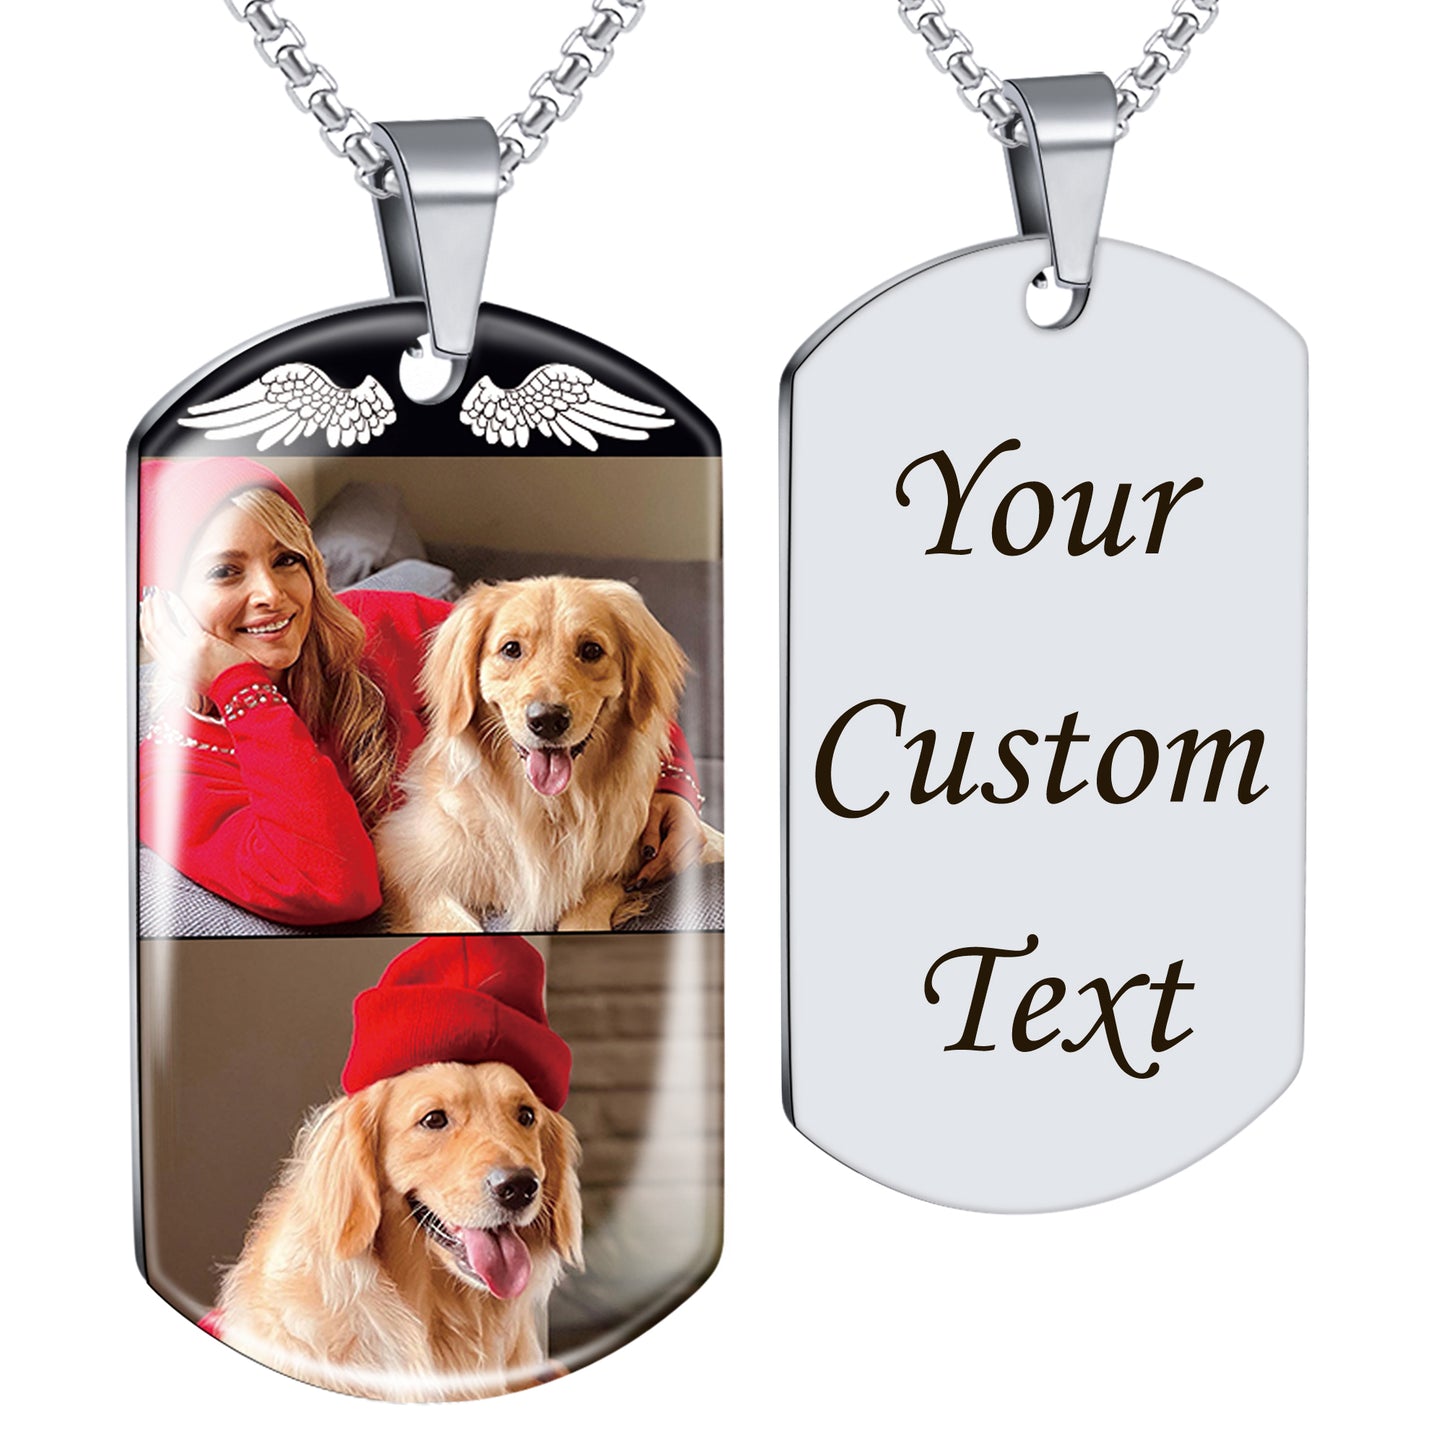 Fanery Sue Custom Multi Pictures Dog Tag Necklace for Men Women, Personalized Memorial Photo Necklace with Picture